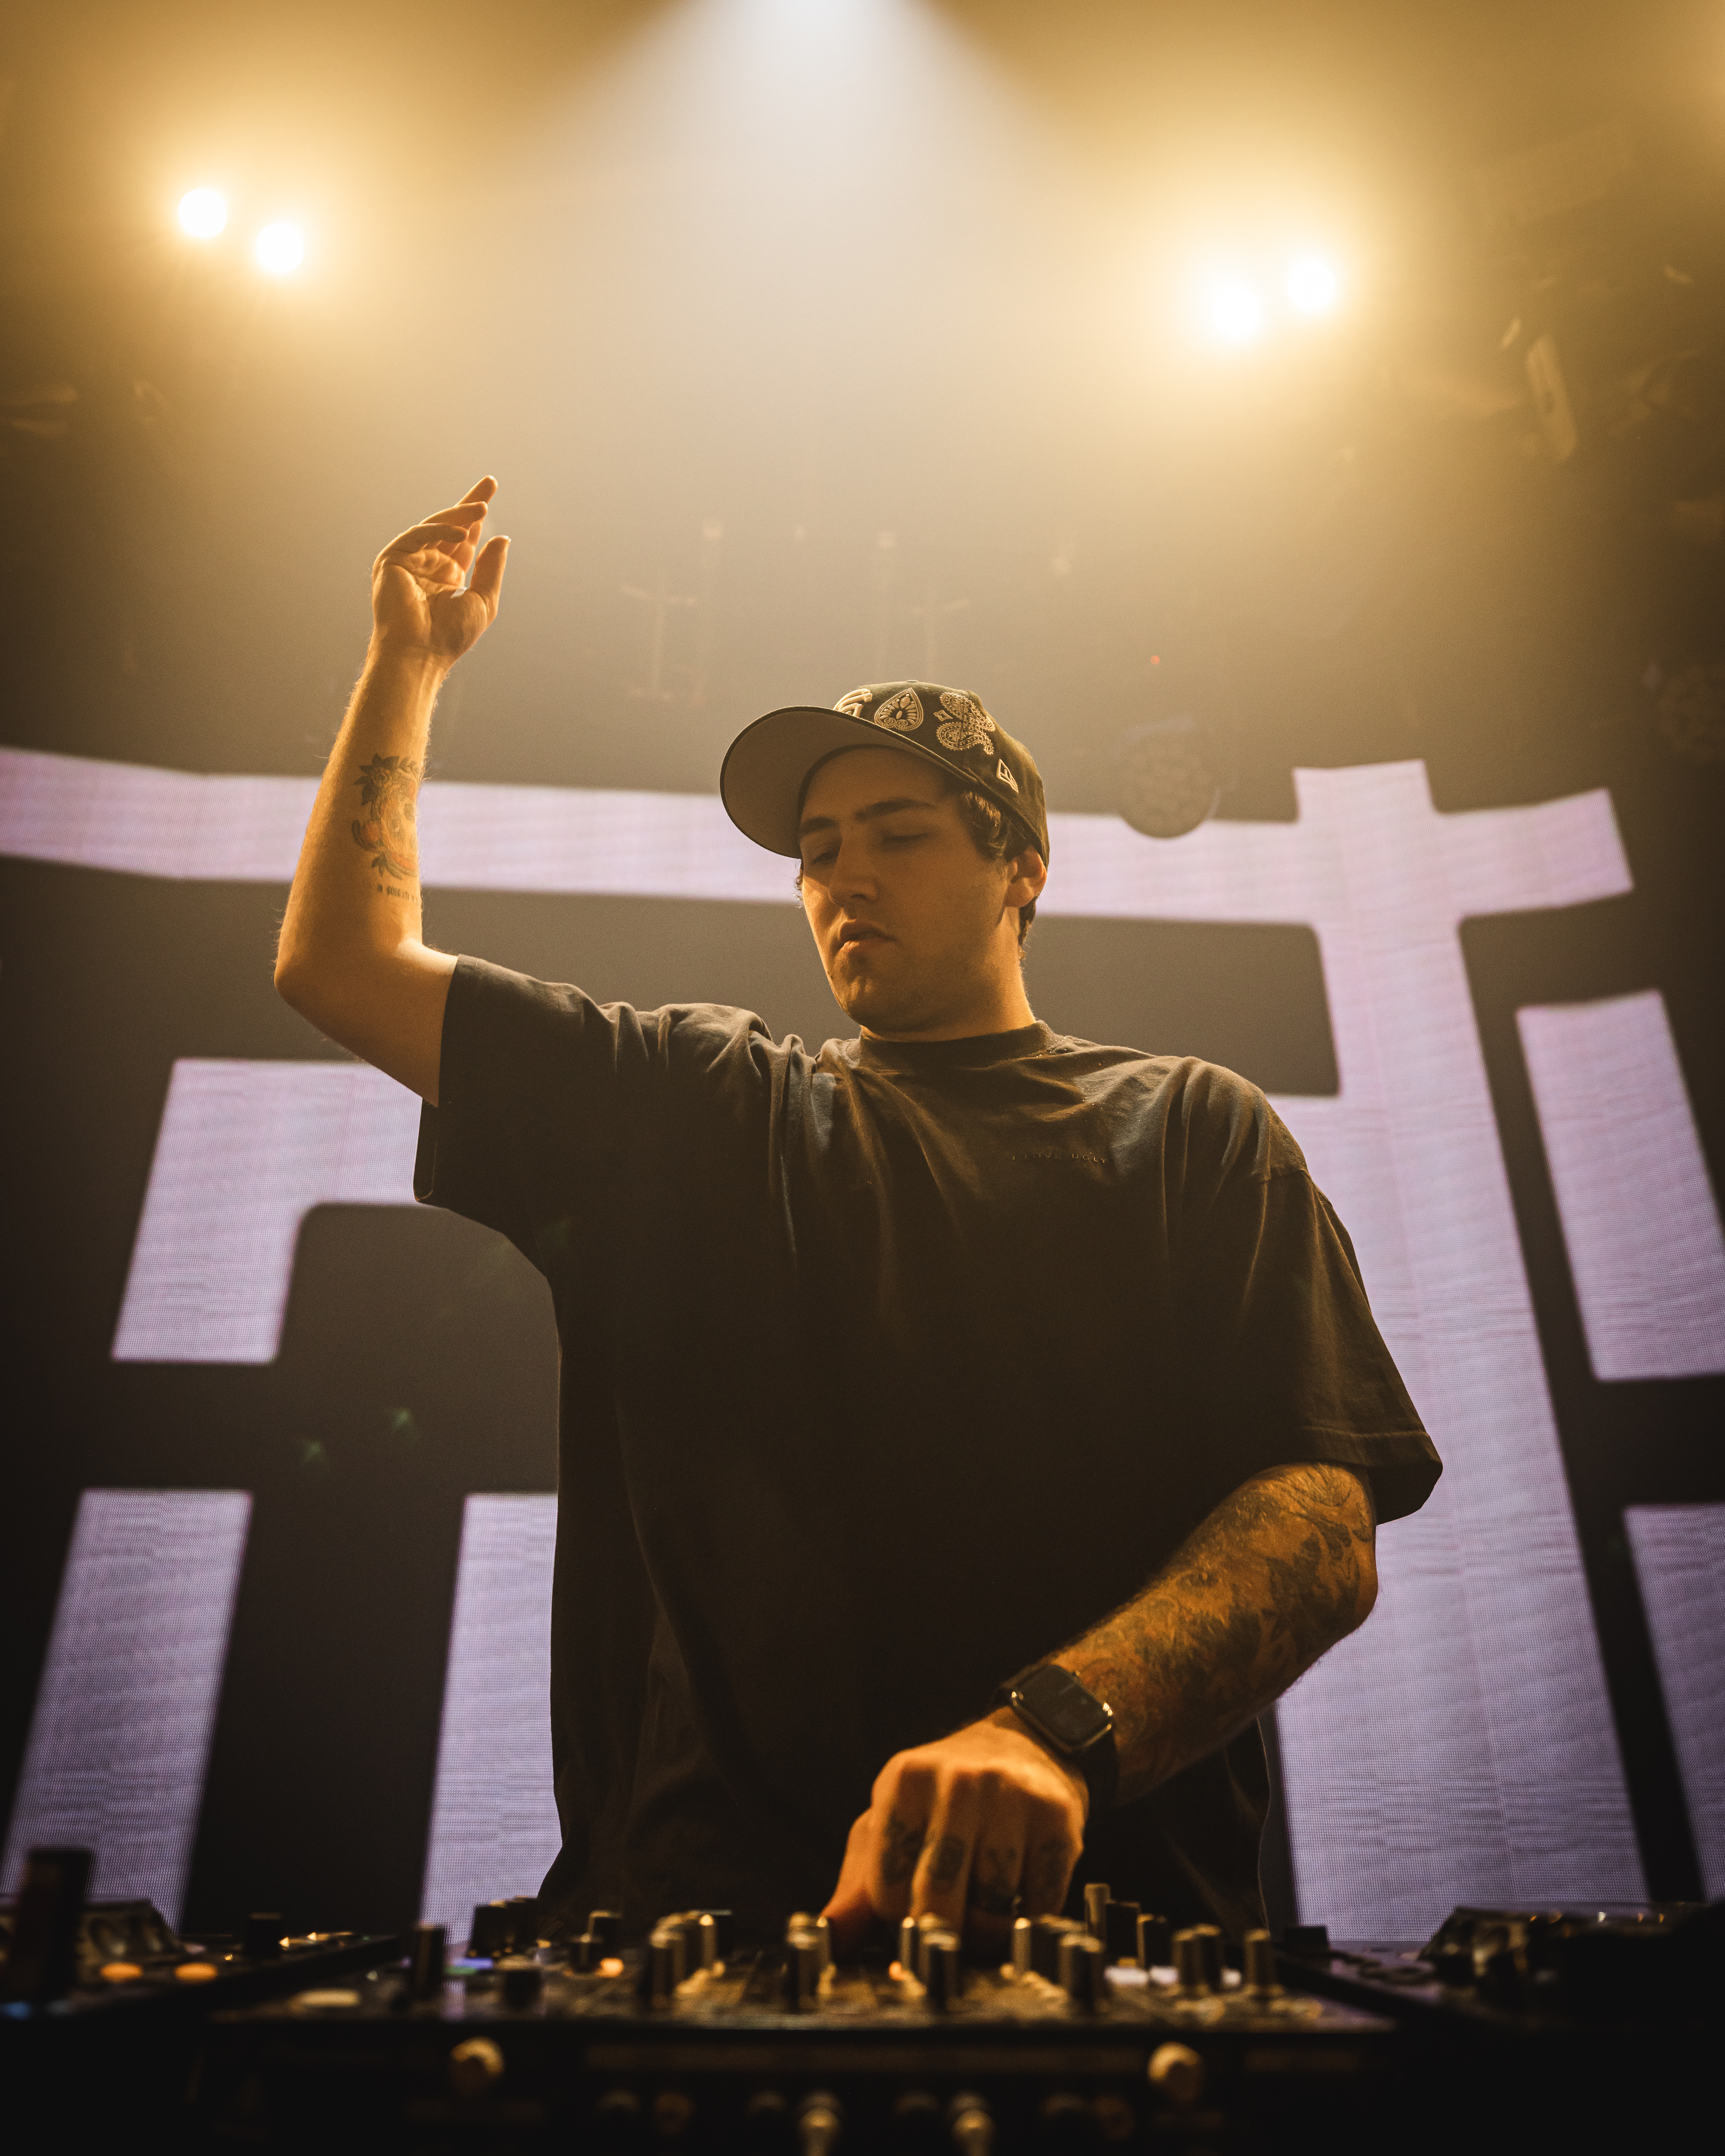 Jauz deejaying in a black shirt and fitted ball cap